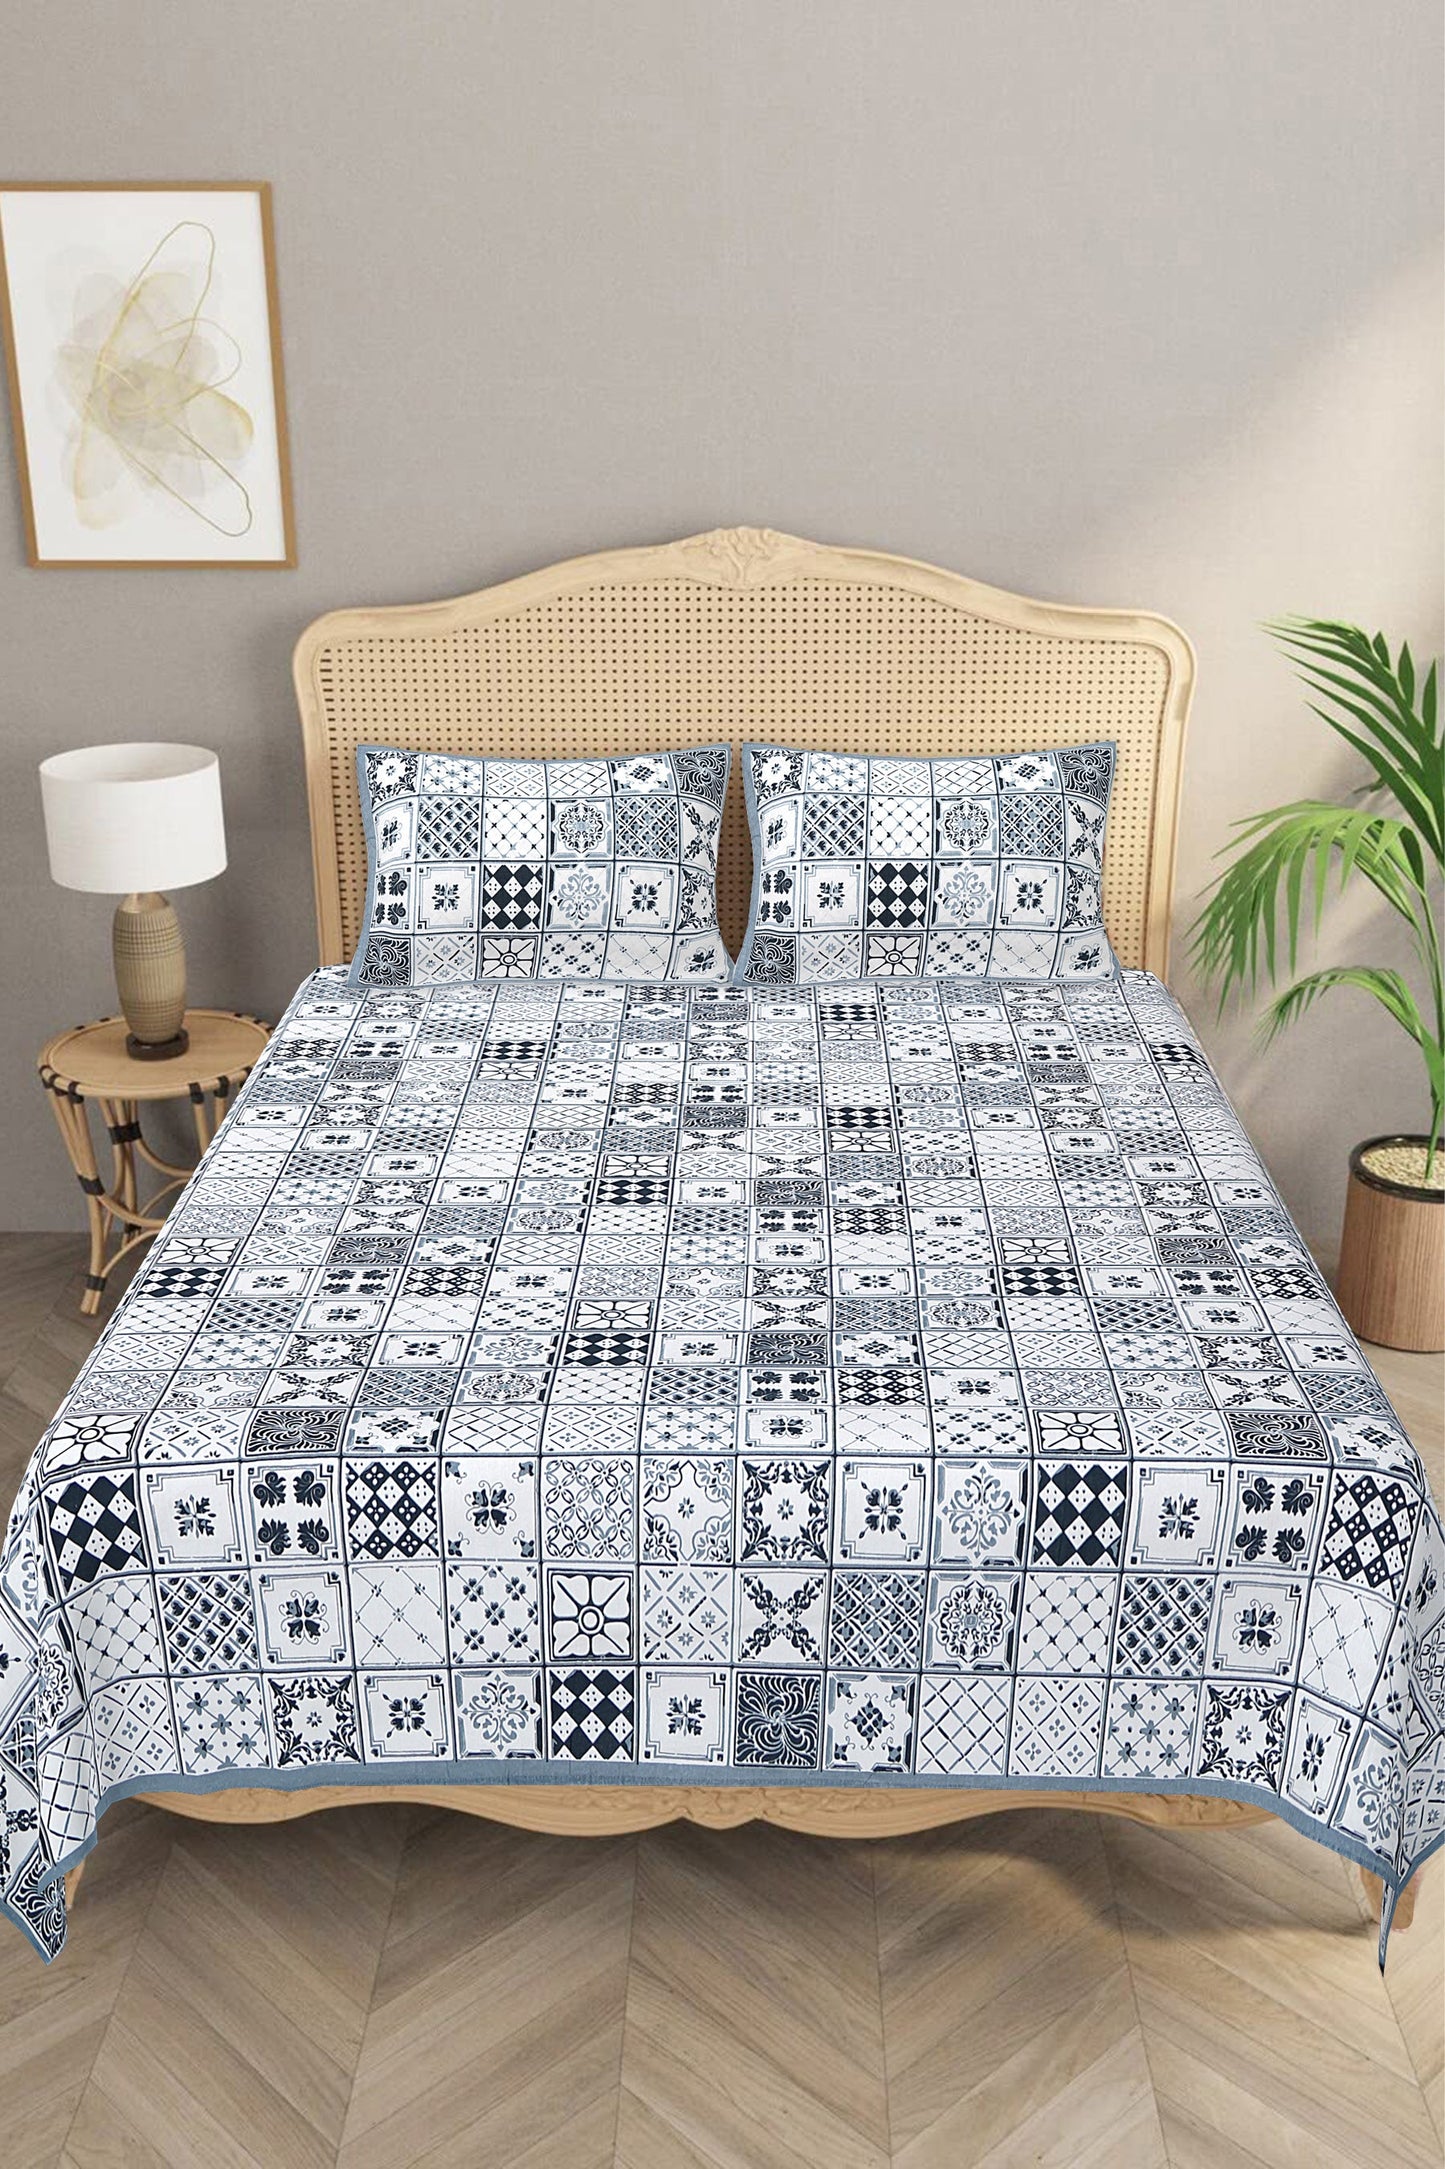 Beautifully Hand Crafted Moroccan Collection of Premium Sheets and Linens - Marrakesh Collection - Grey Square Marikesh Double Bed Sheet with 2 Pillow Covers